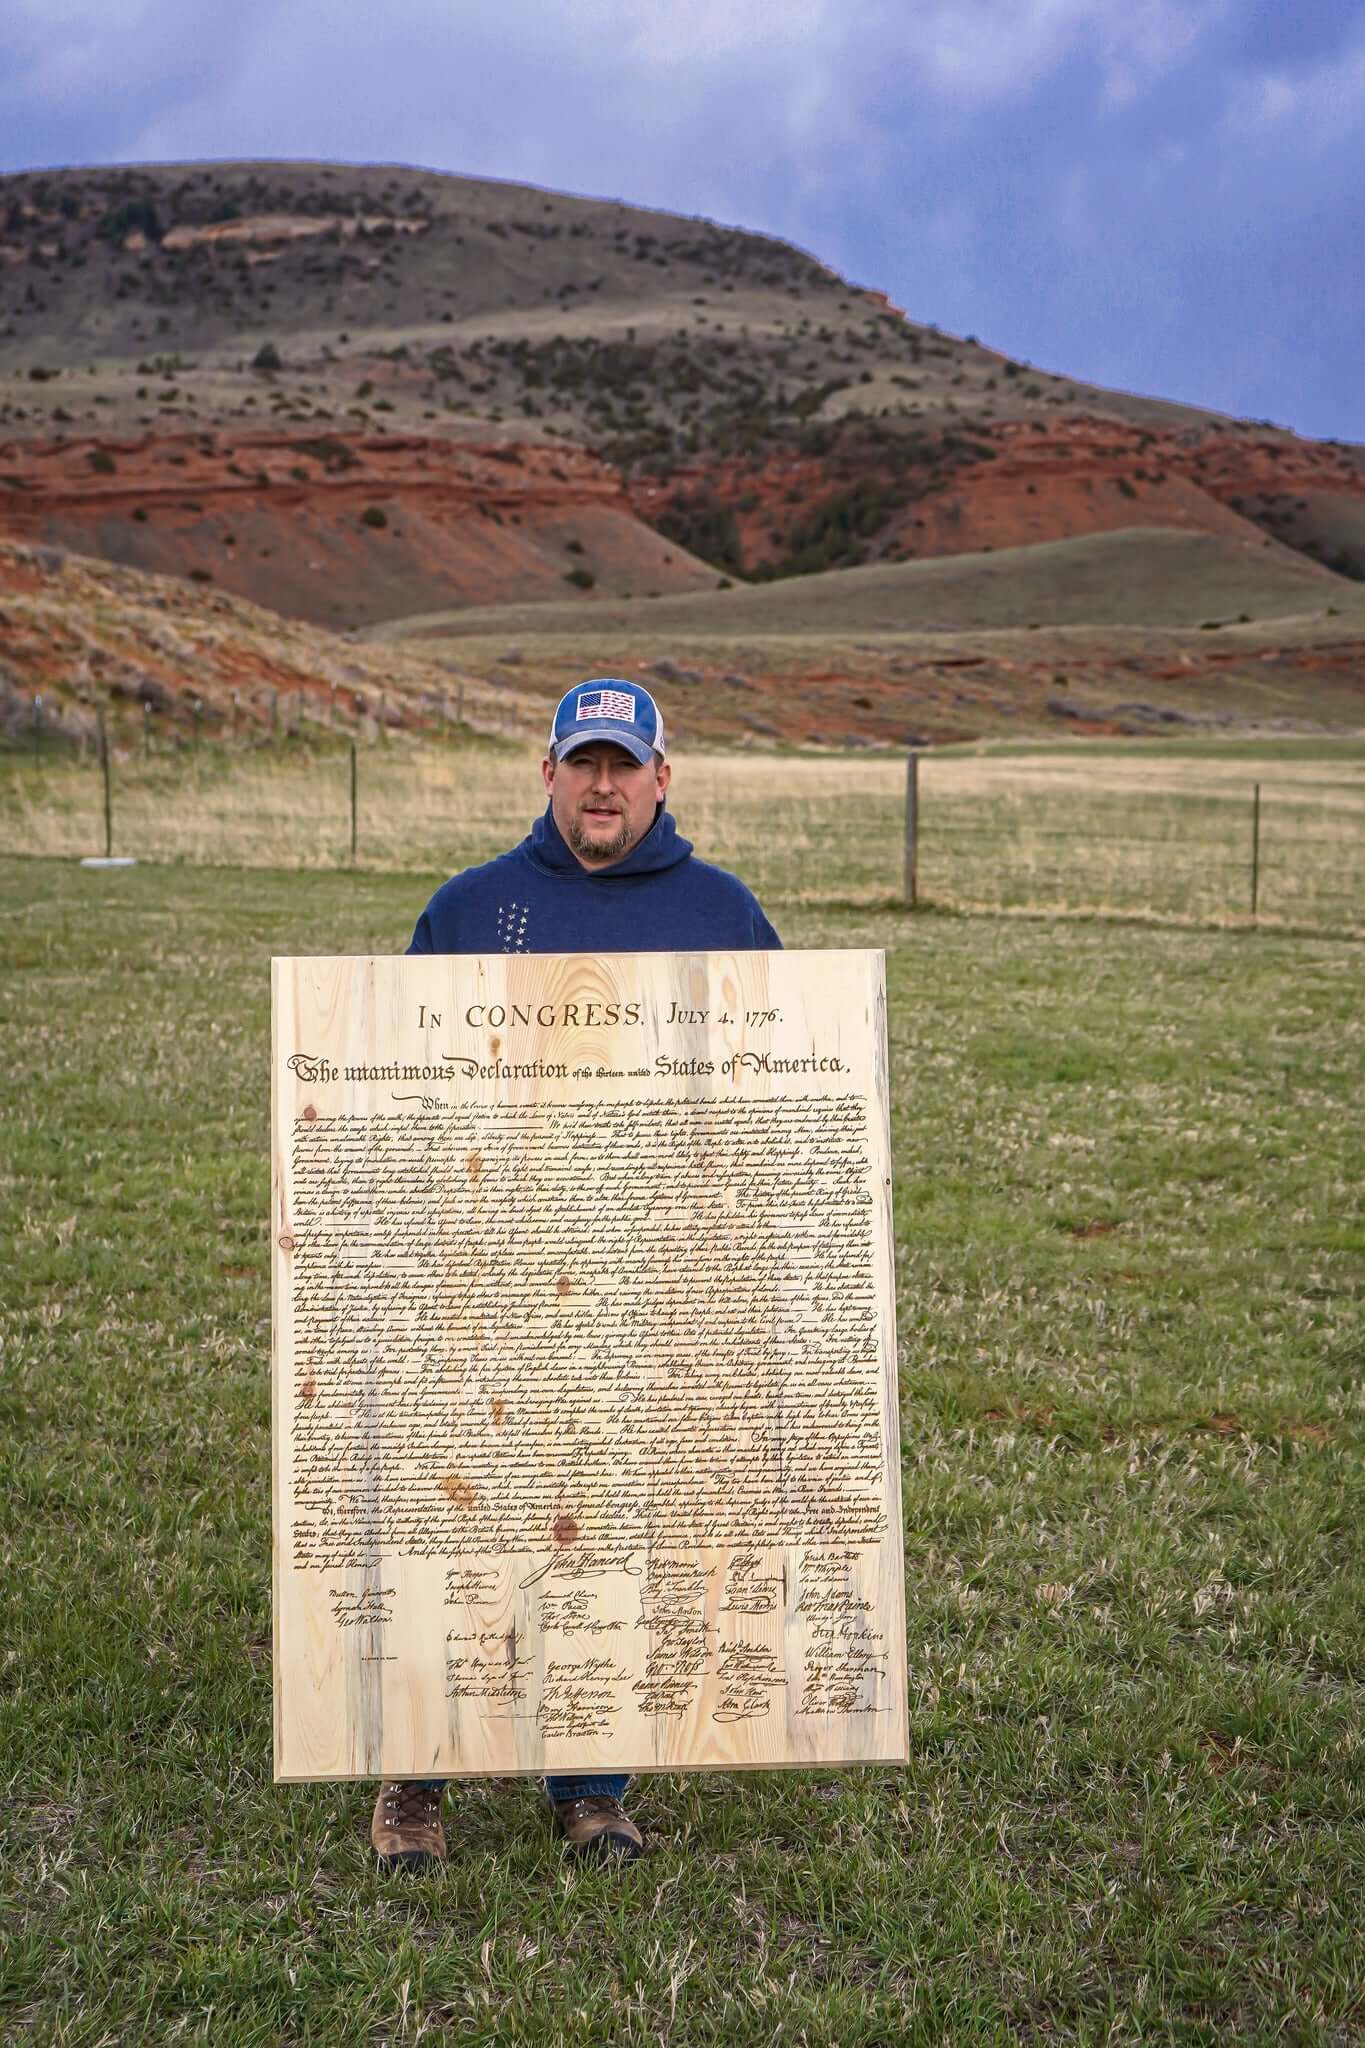 Declaration of Independence laser engraved on pine on display with Wyoming landscape in background